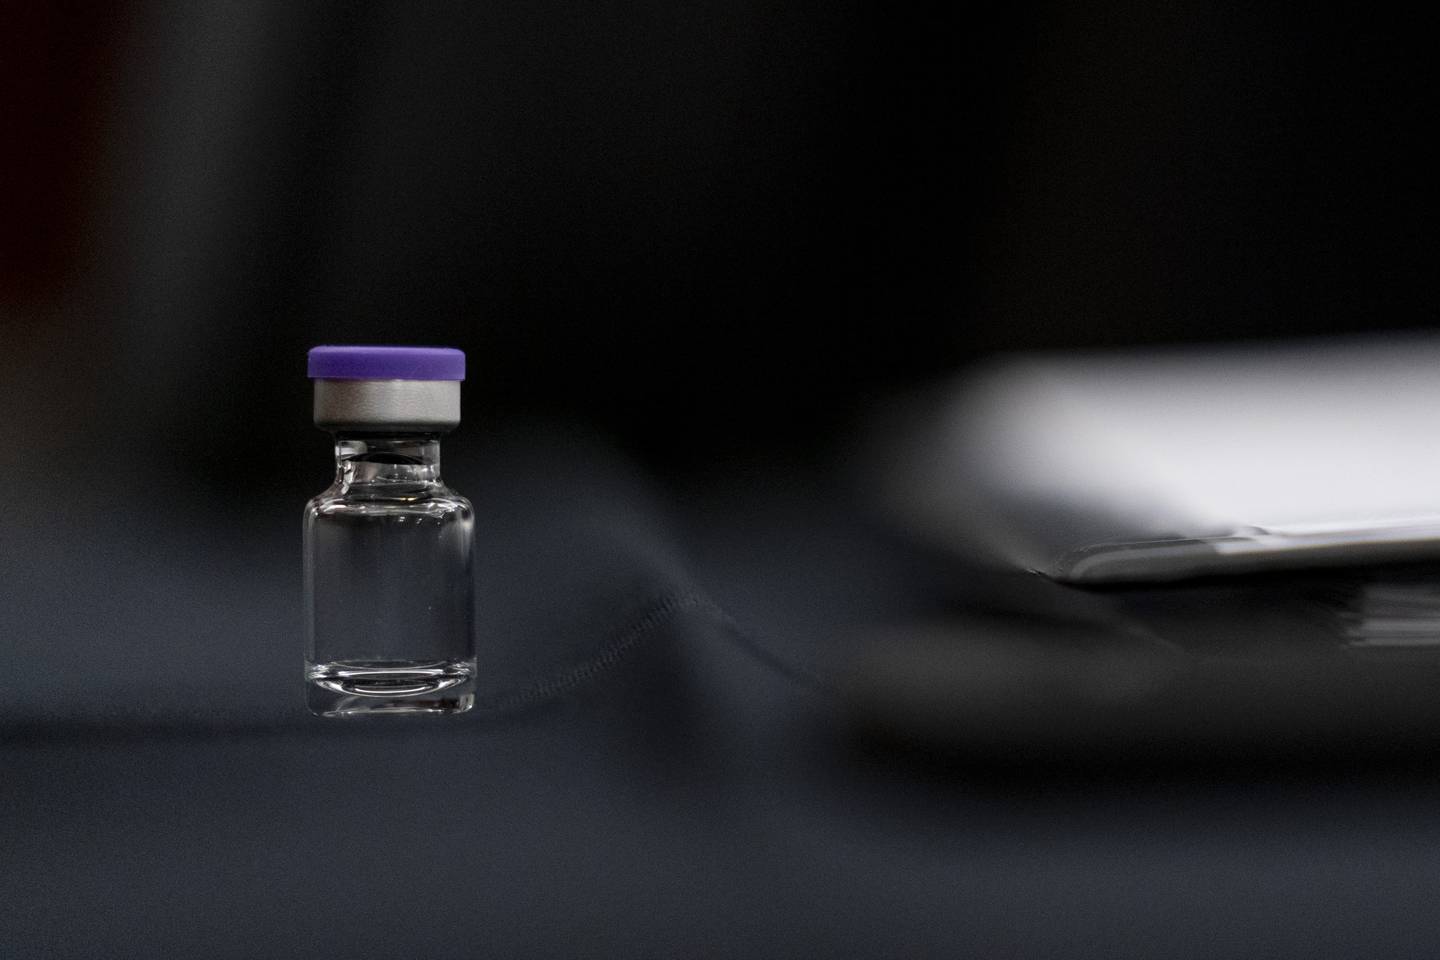 WASHINGTON, DC - DECEMBER 10: An example of the Pfizer COVID-19 vaccine vial is visible on a desk before a Senate Transportation subcommittee hybrid hearing on transporting a coronavirus vaccine on Capitol Hill, on December 10, 2020 in Washington, DC. (Photo by Andrew Harnik-Pool/Getty Images)